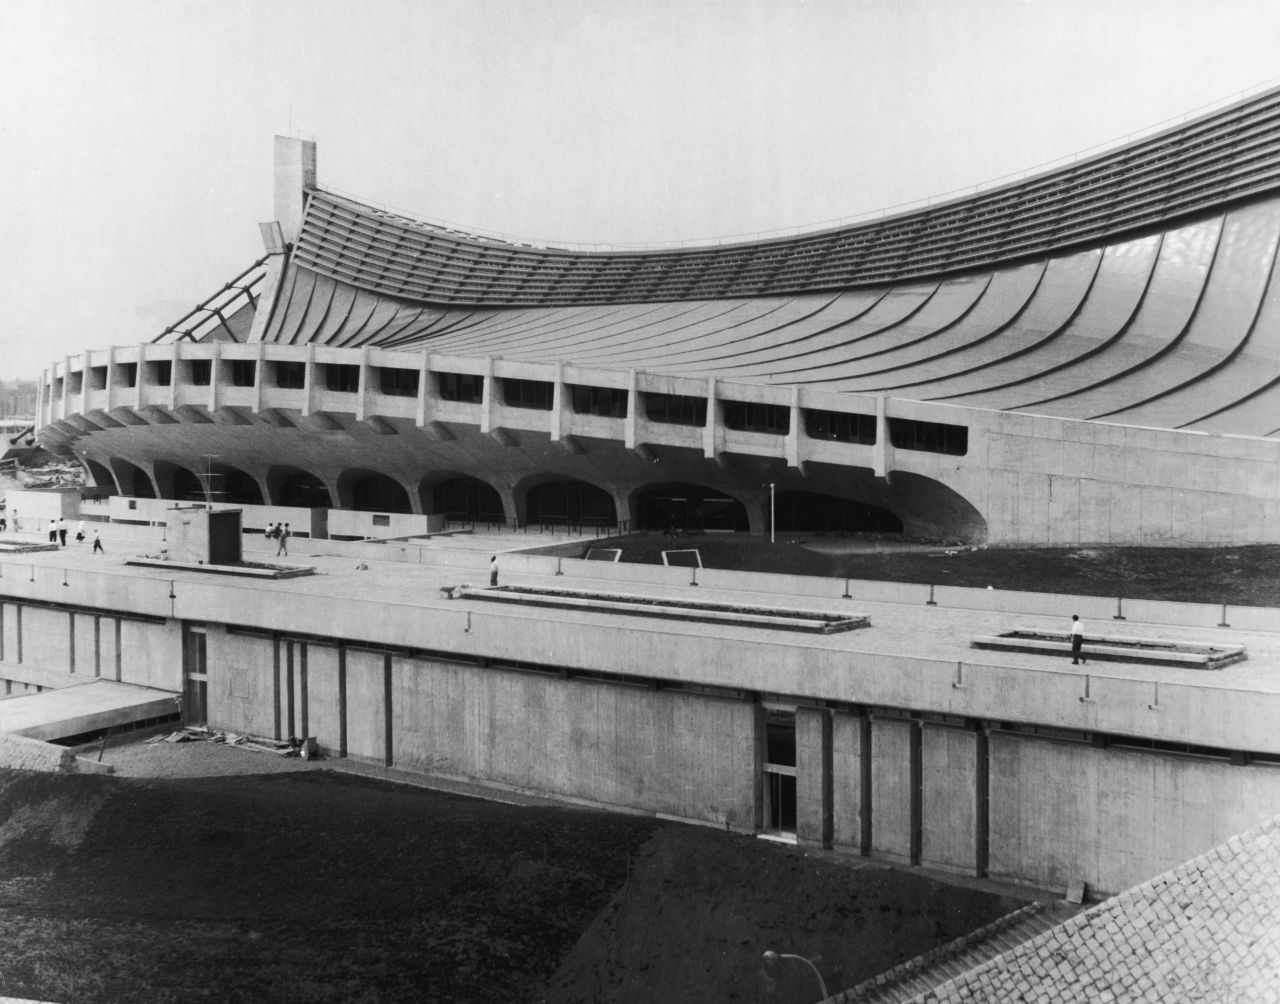 The completed National Gymnasium. The building was designed by Japanese architect Kenzo Tange.